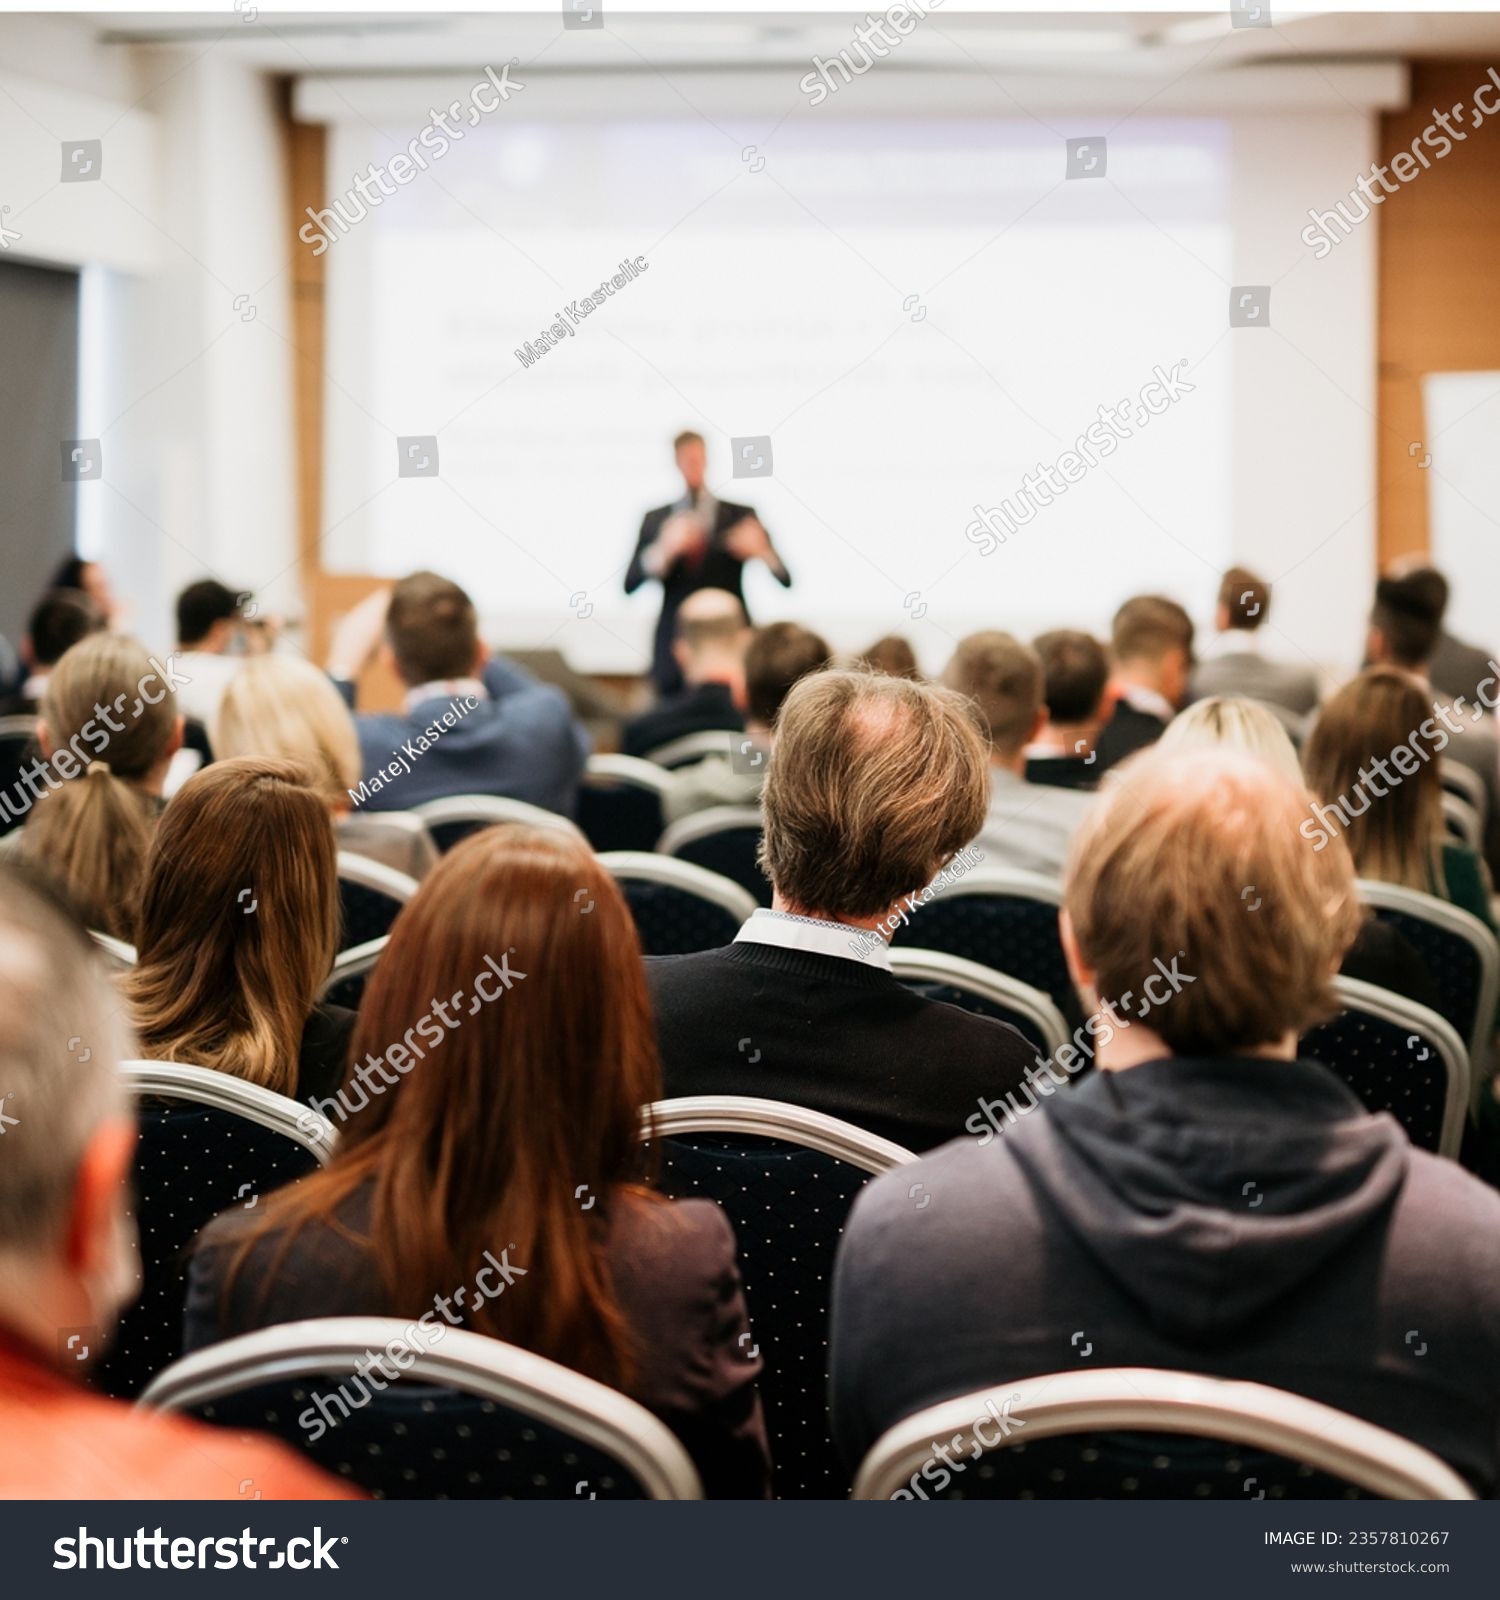 Speaker giving a talk in conference hall at business event. Rear view of unrecognizable people in audience at the conference hall. Business and entrepreneurship concept #2357810267